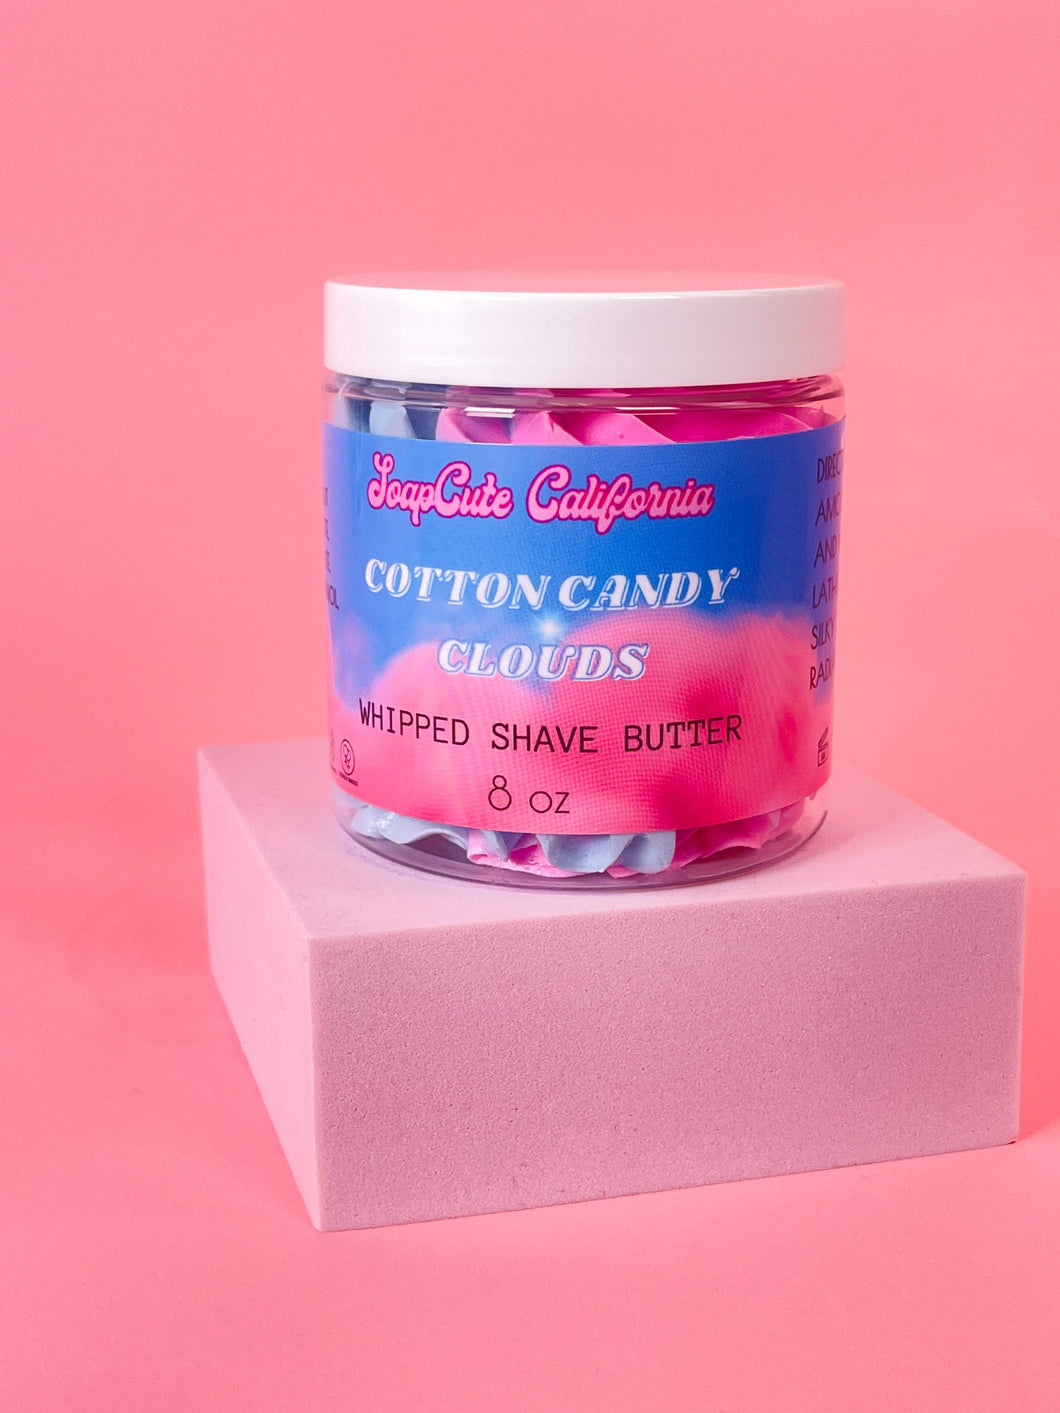 Cotton Candy Clouds Whipped Shave Butter